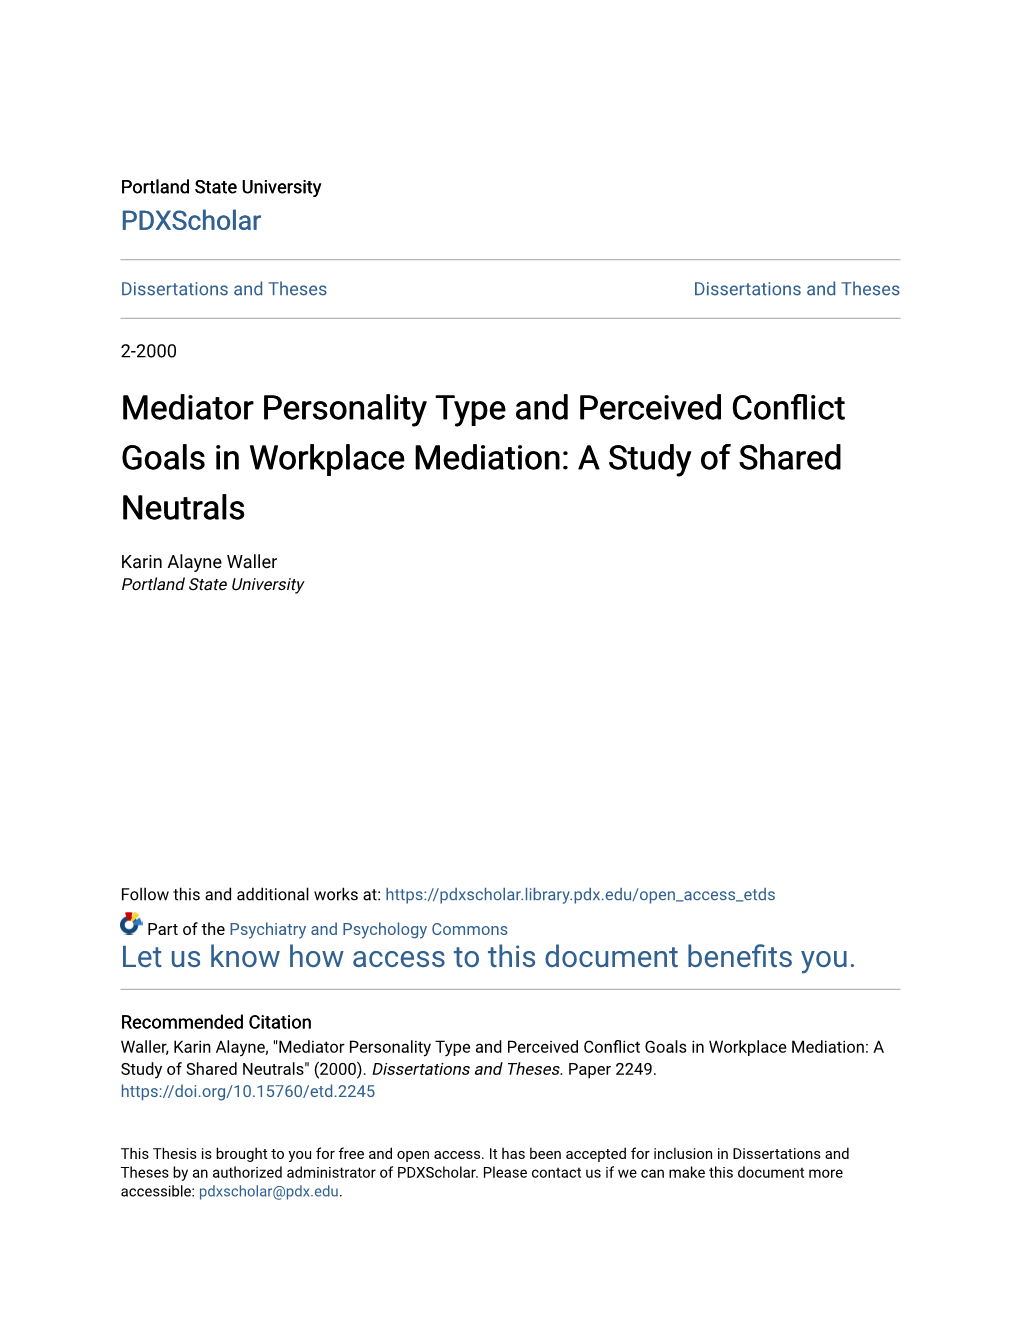 Mediator Personality Type and Perceived Conflict Goals in Workplace Mediation: a Study of Shared Neutrals